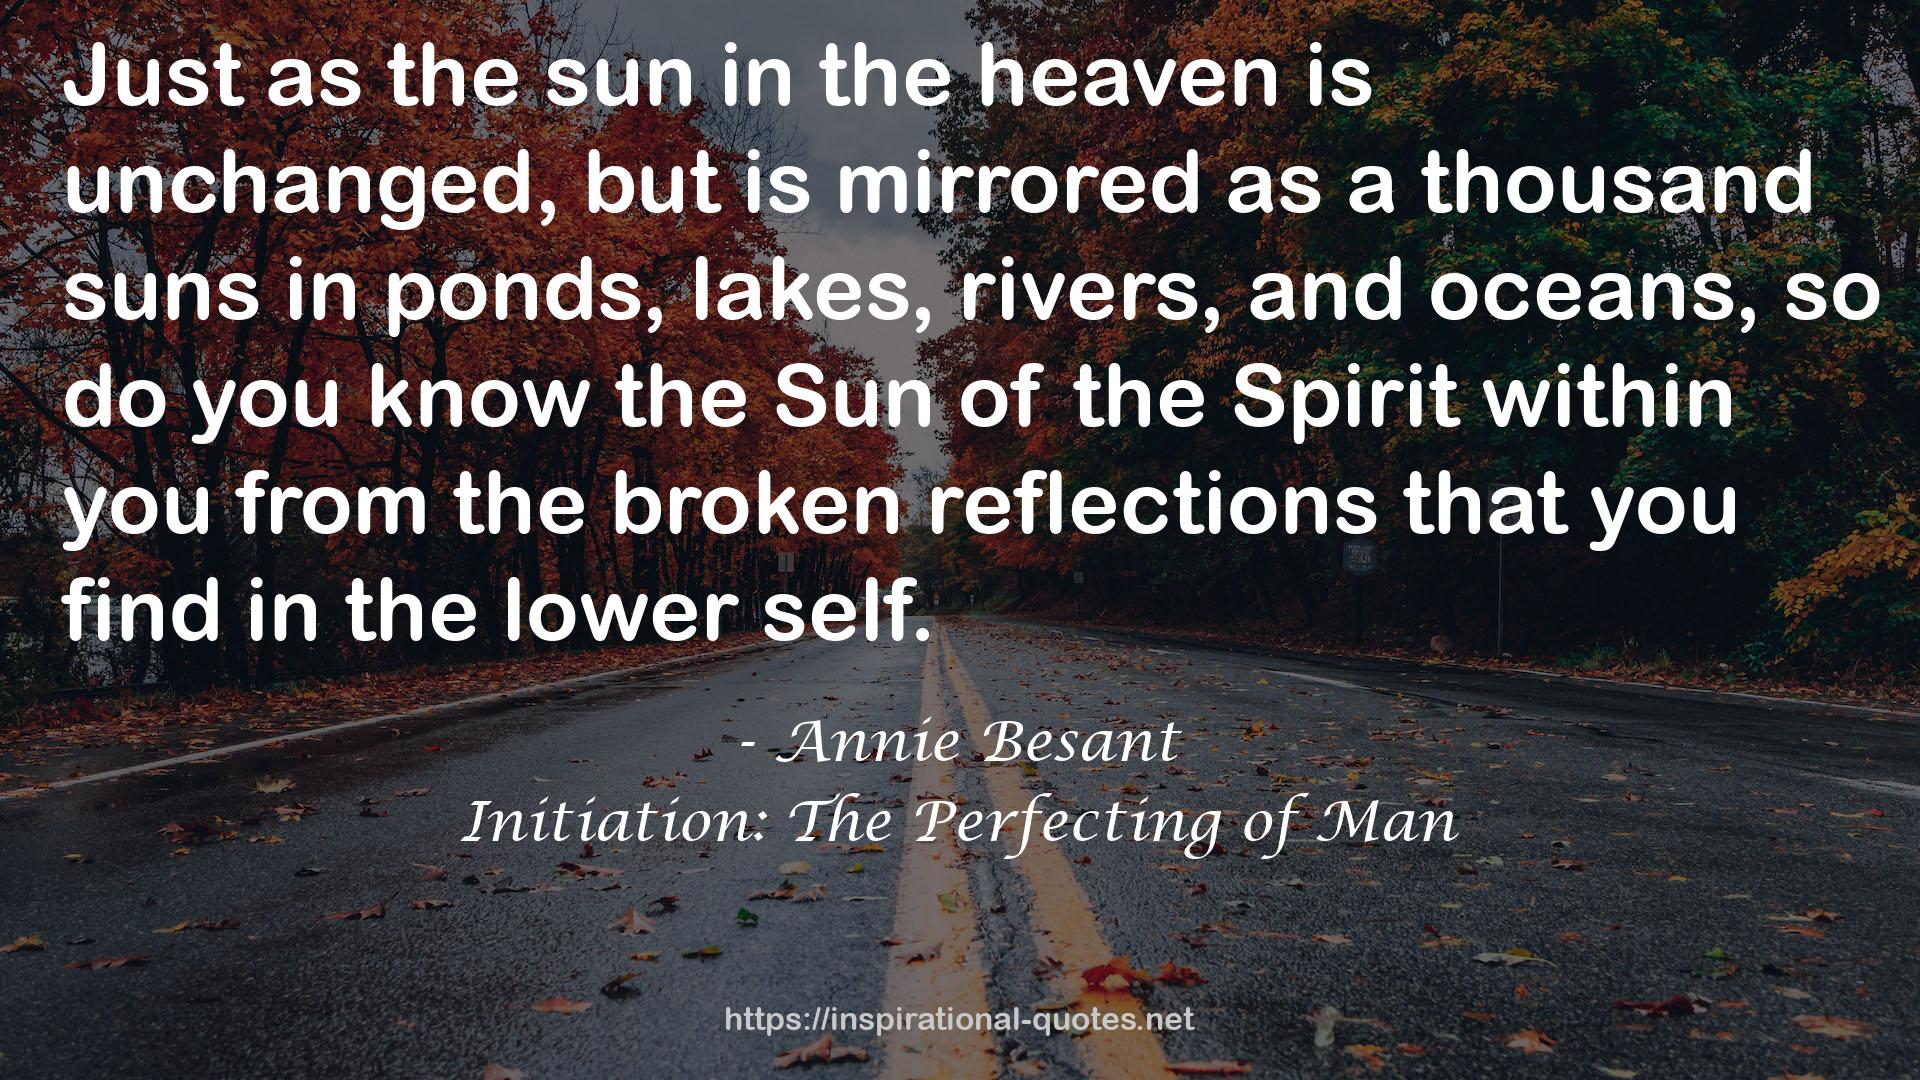 Initiation: The Perfecting of Man QUOTES